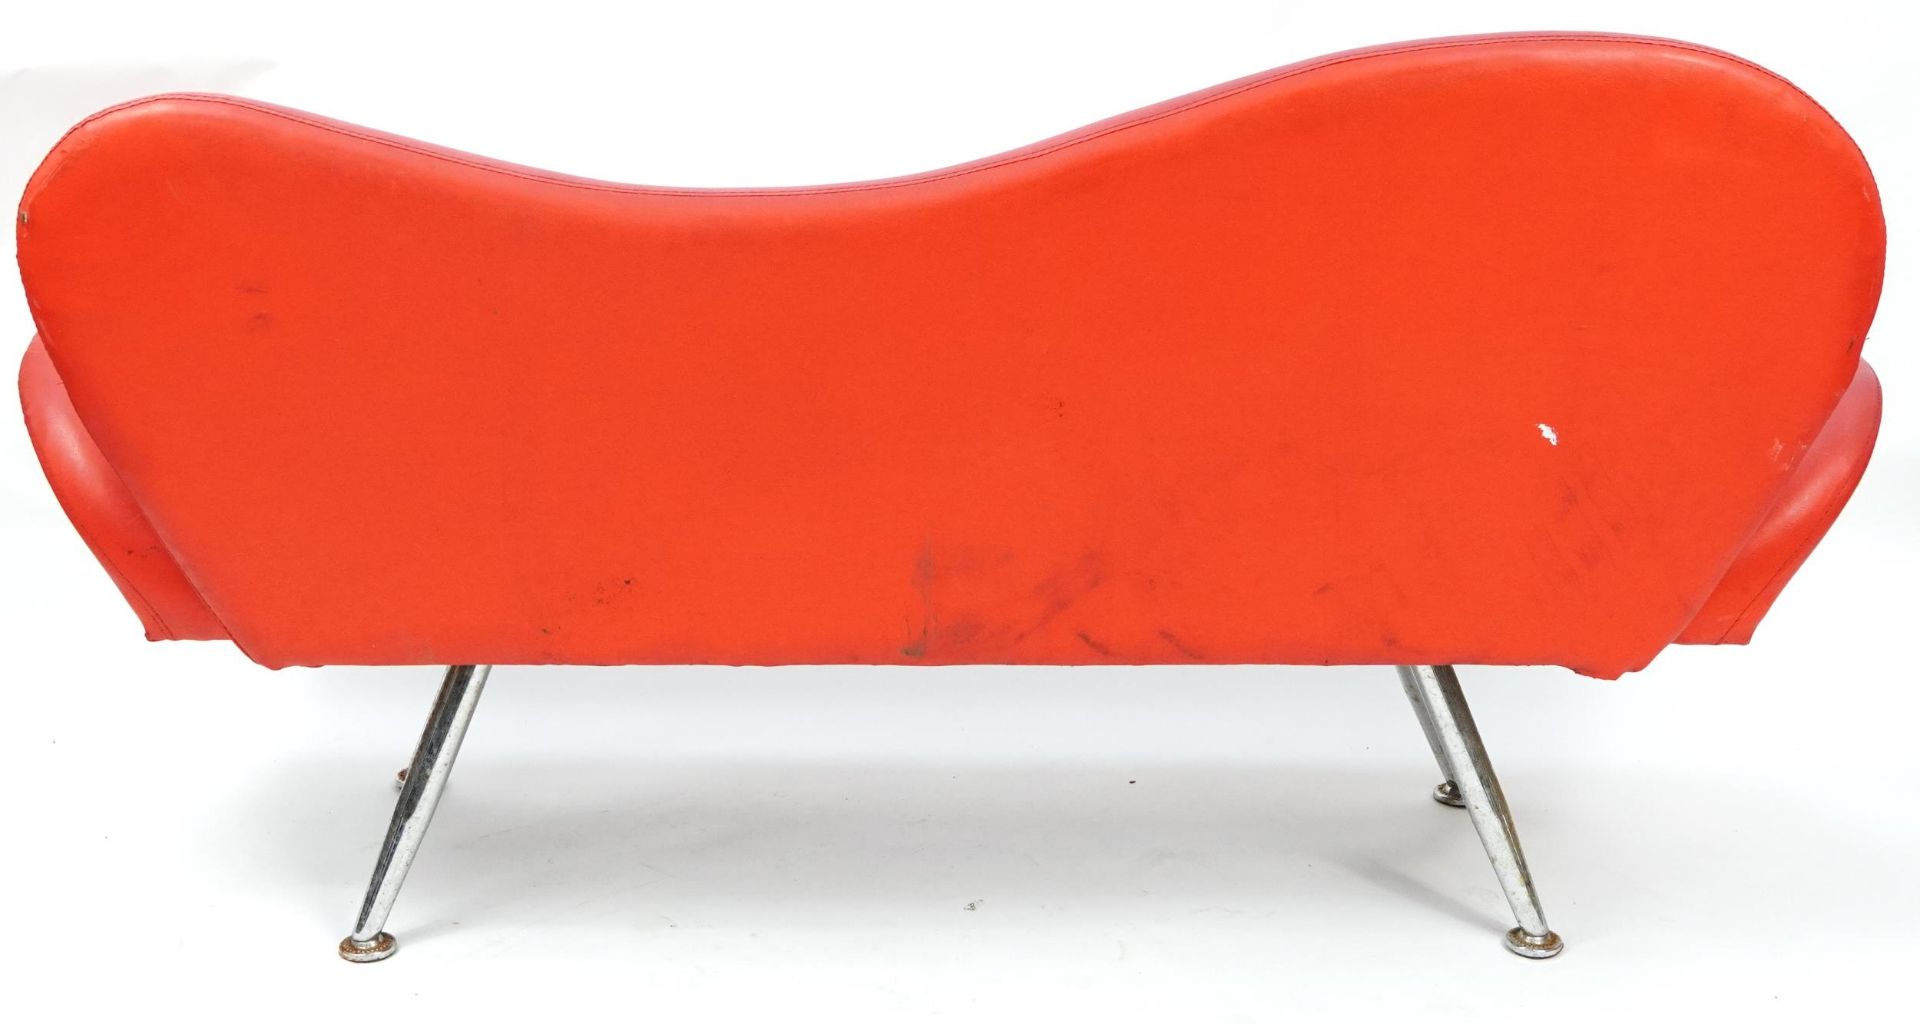 Red leather lips design salon settee raised on chrome legs, 180cm wide - Image 2 of 2